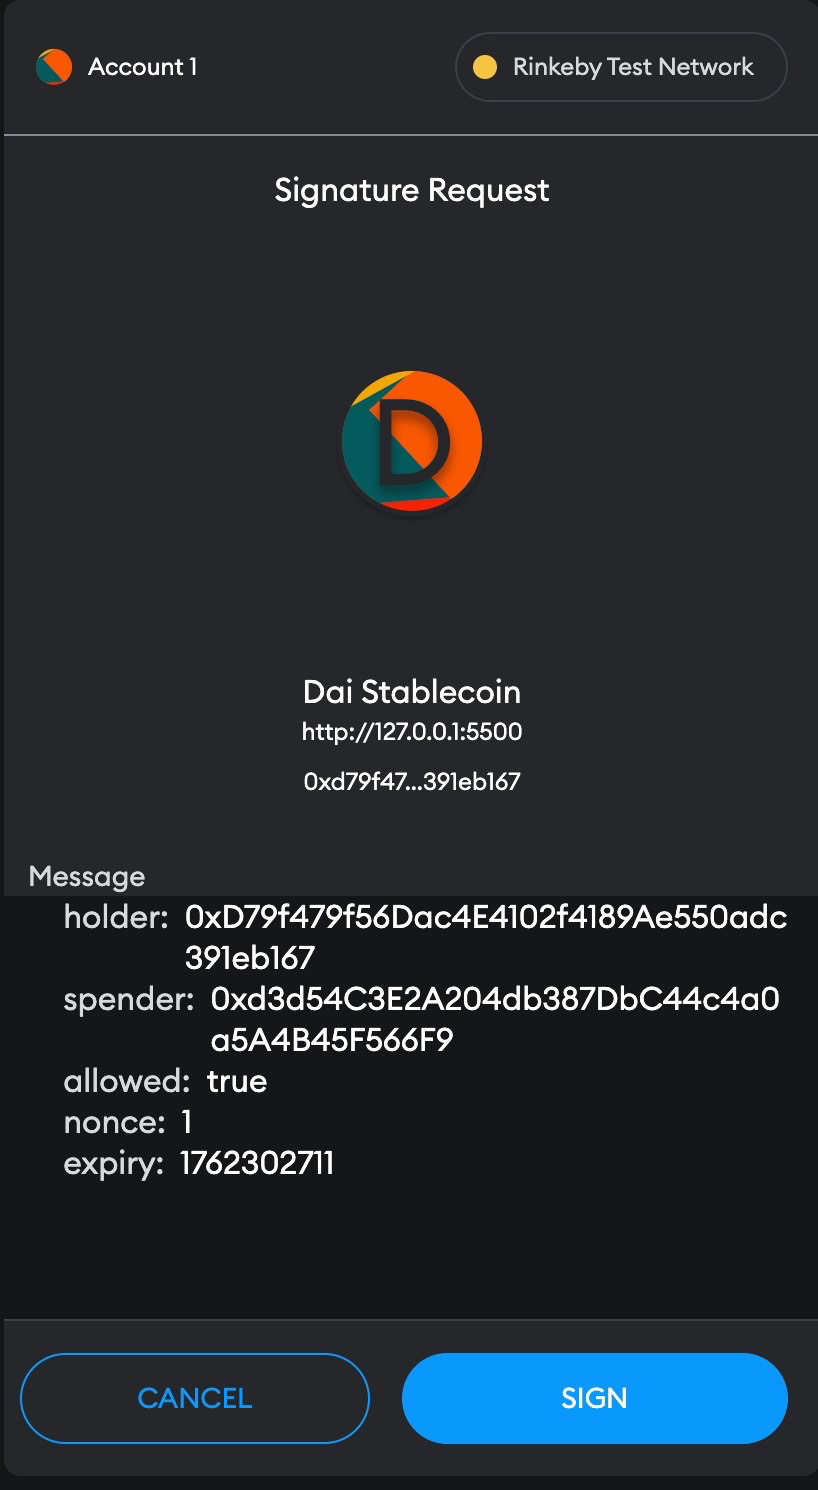 We got this signature for $DAI on Rinkeby test-net